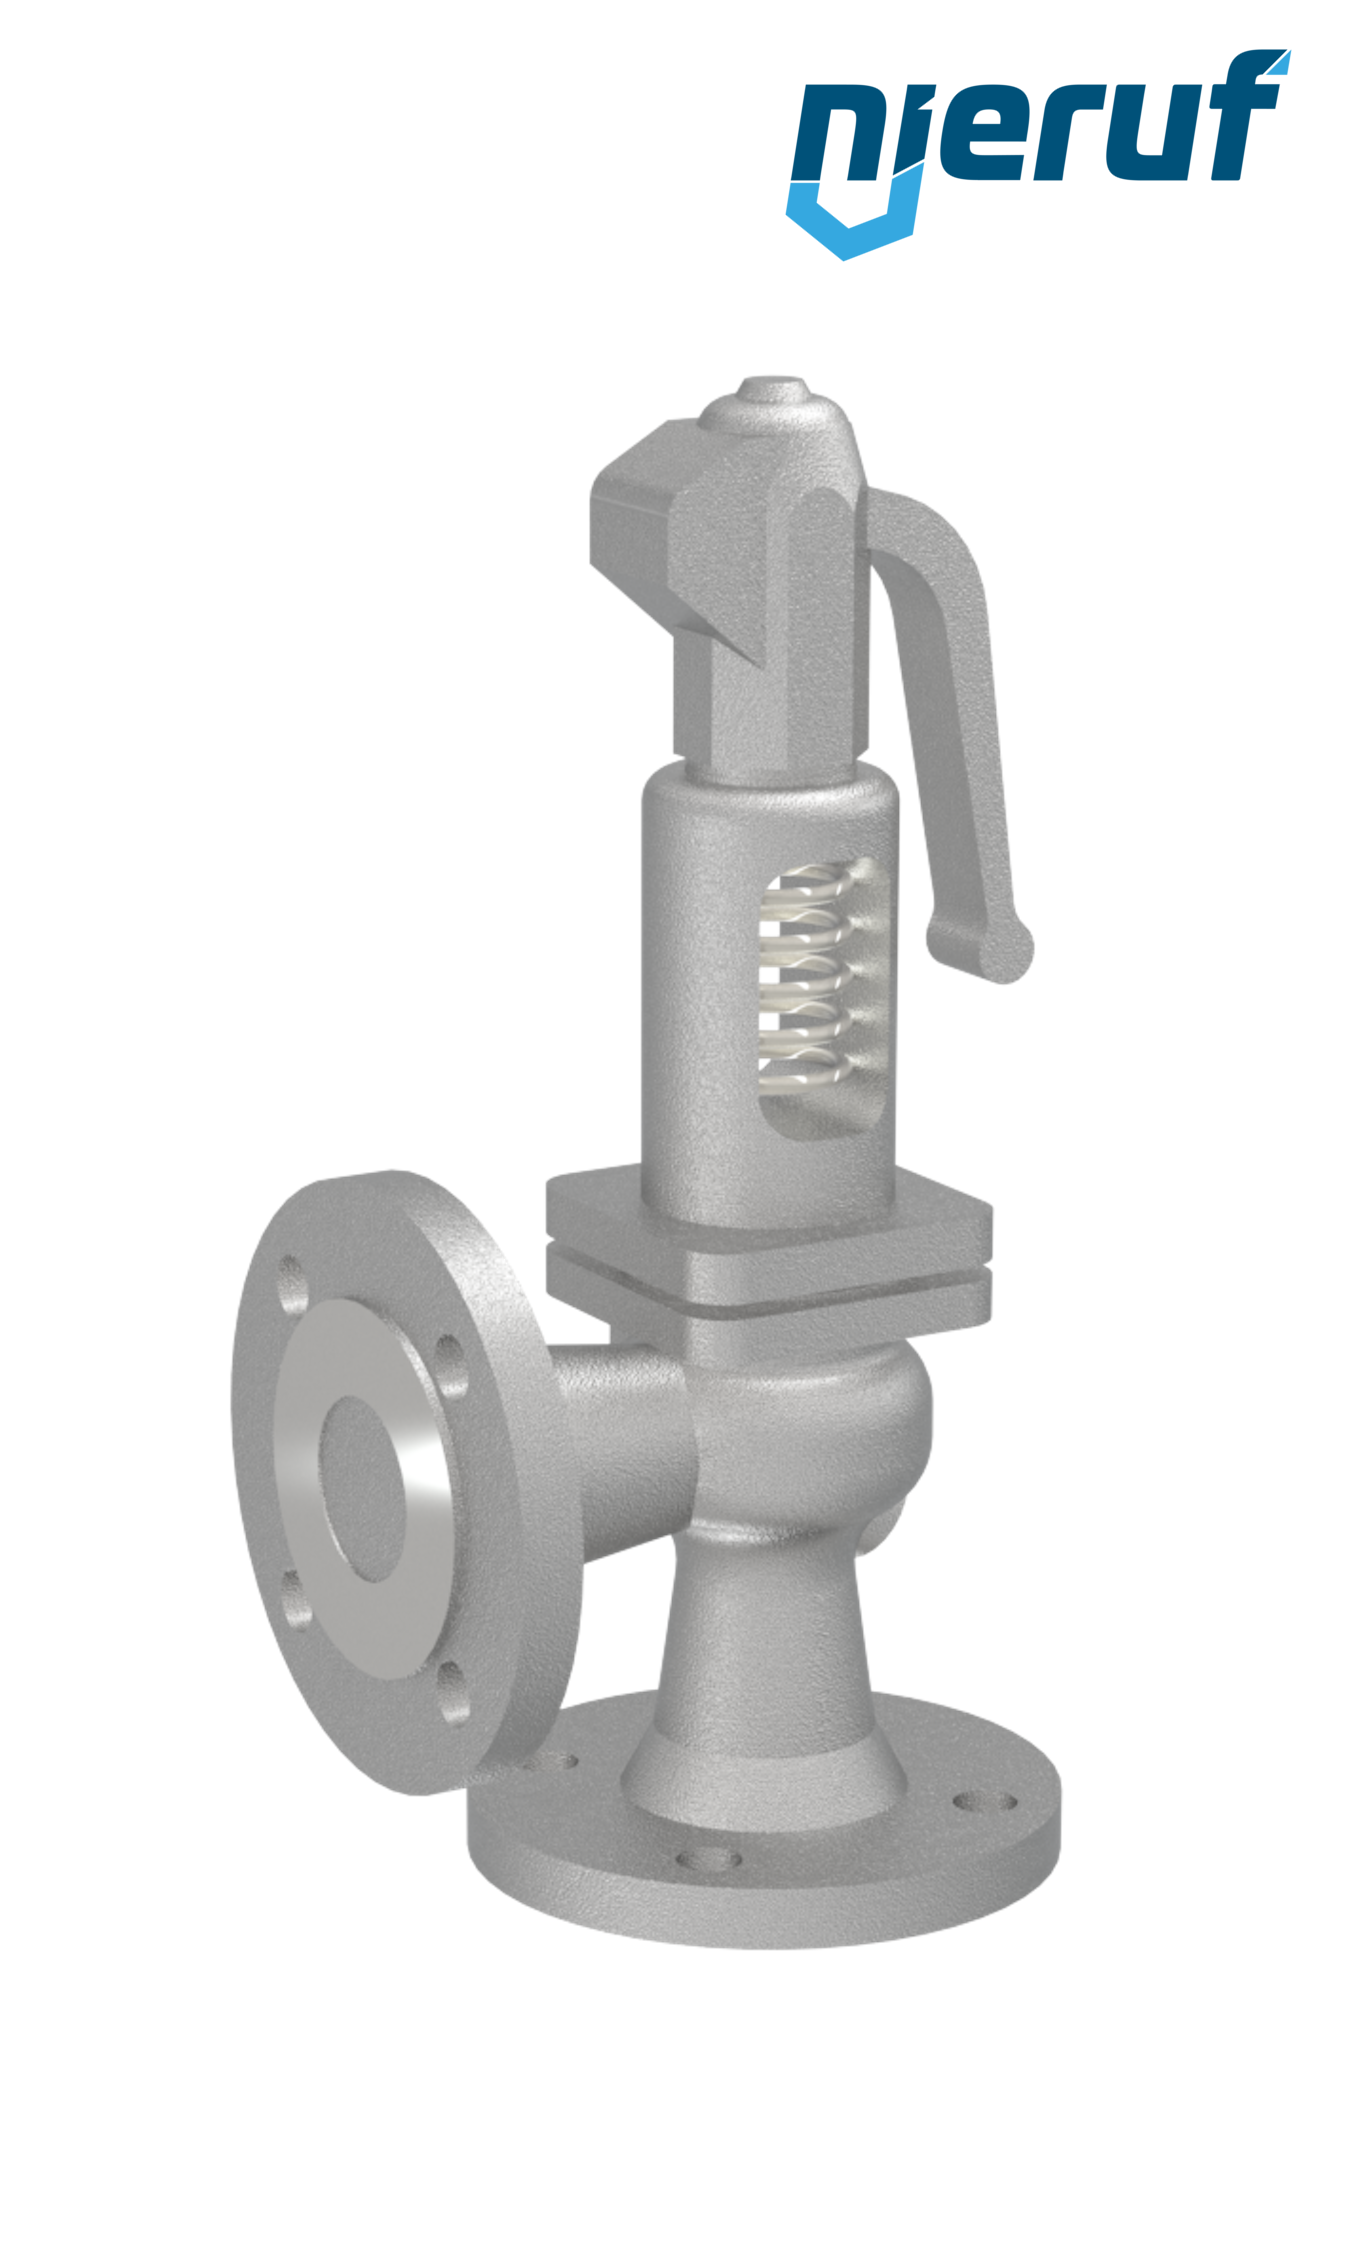 flange-safety valve DN50/DN50 SF0202, cast steel metal, with lever